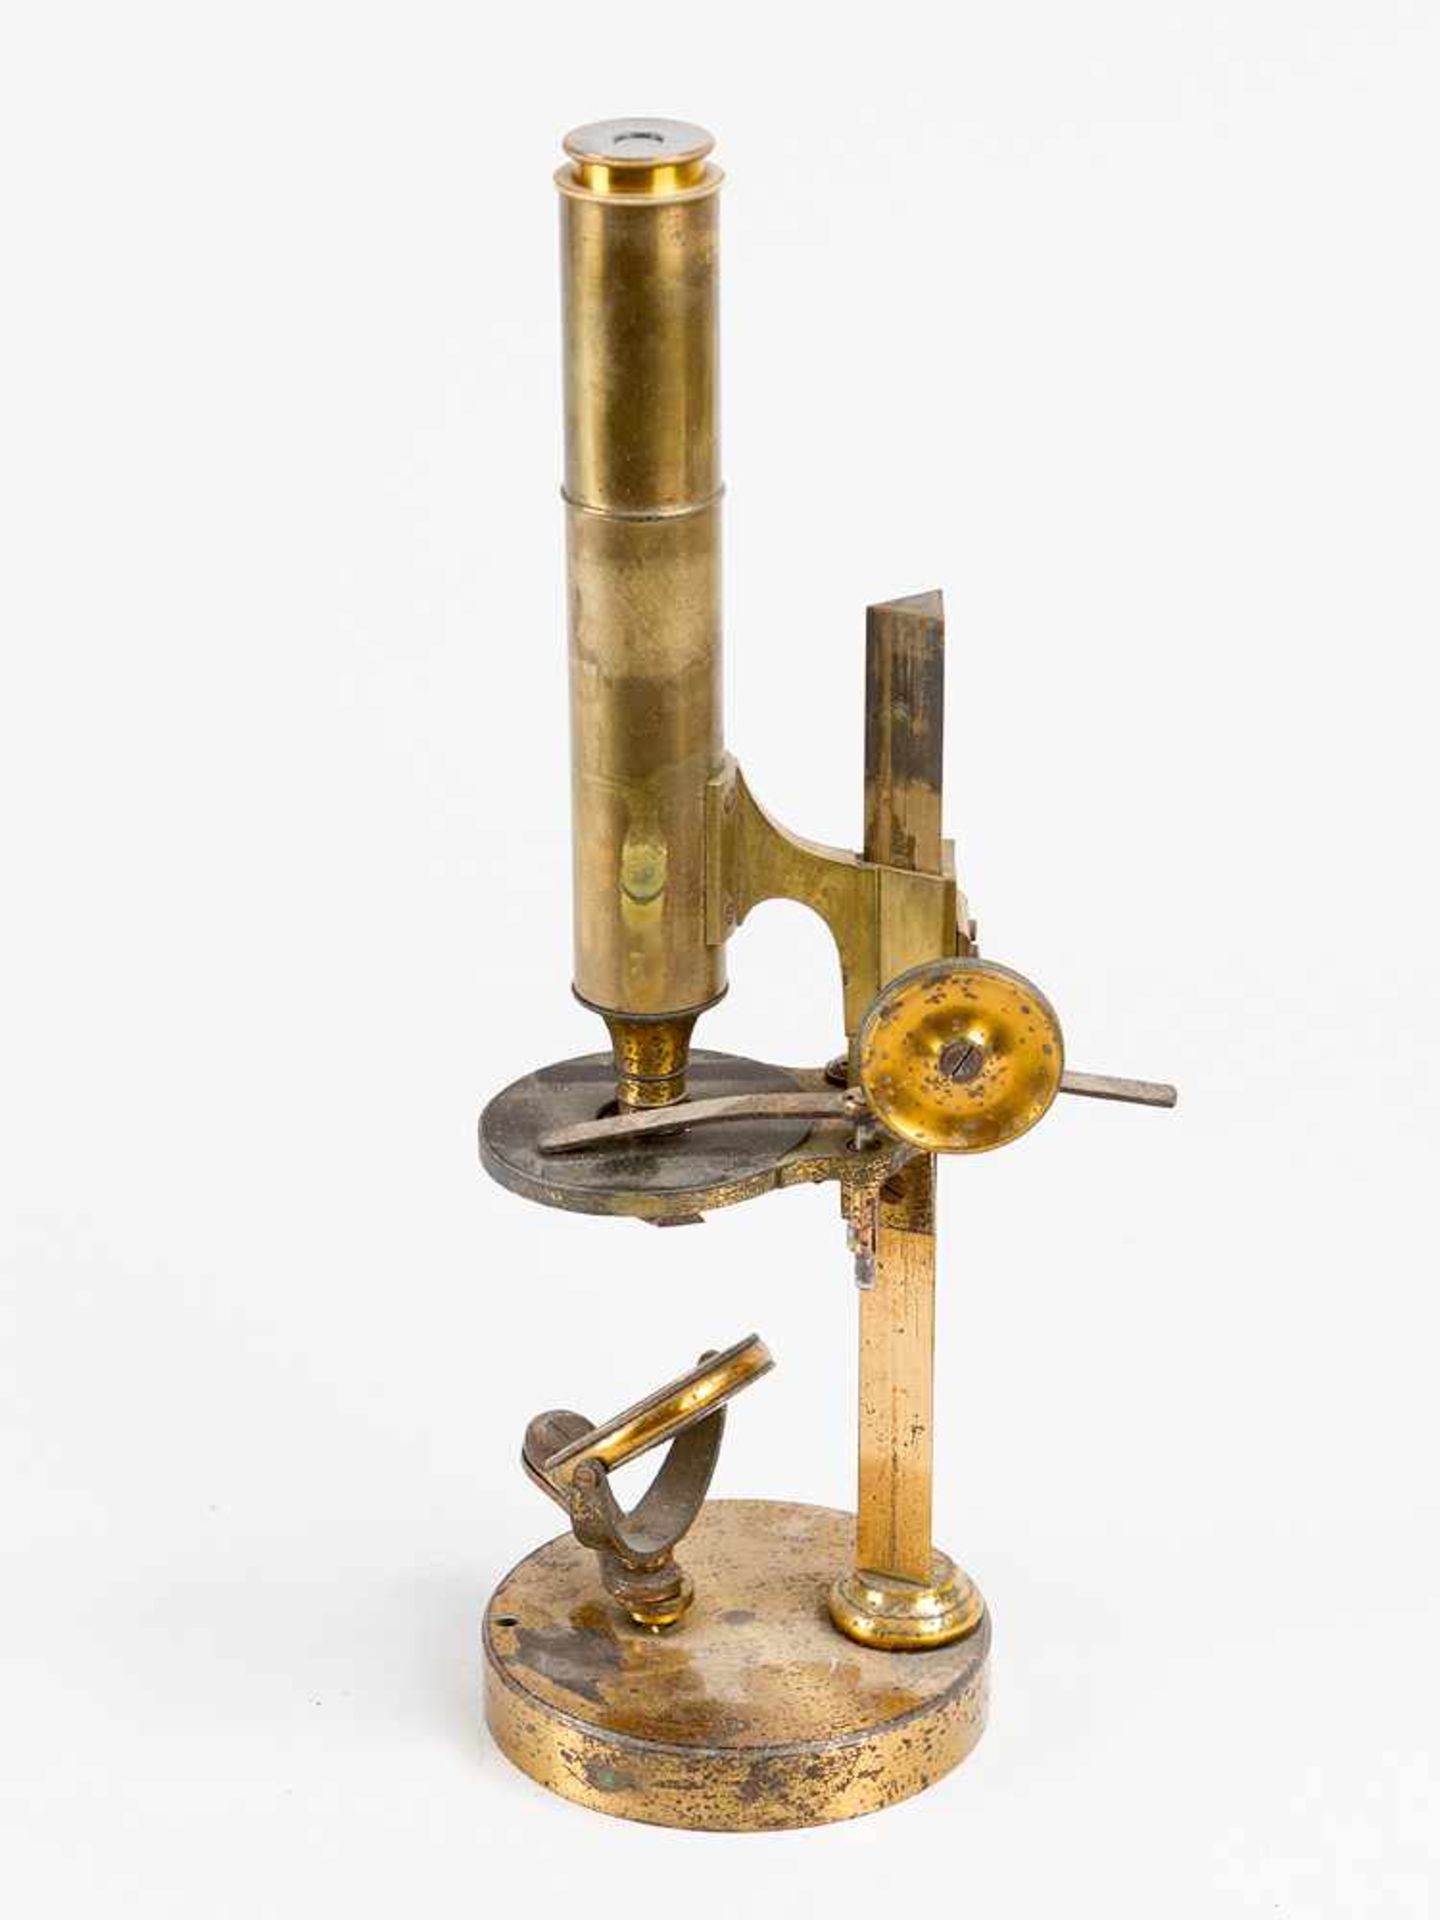 Vienna Microscope, probably by the Plössl Manufacture, gilded and polished brass, adjustable, - Bild 2 aus 3